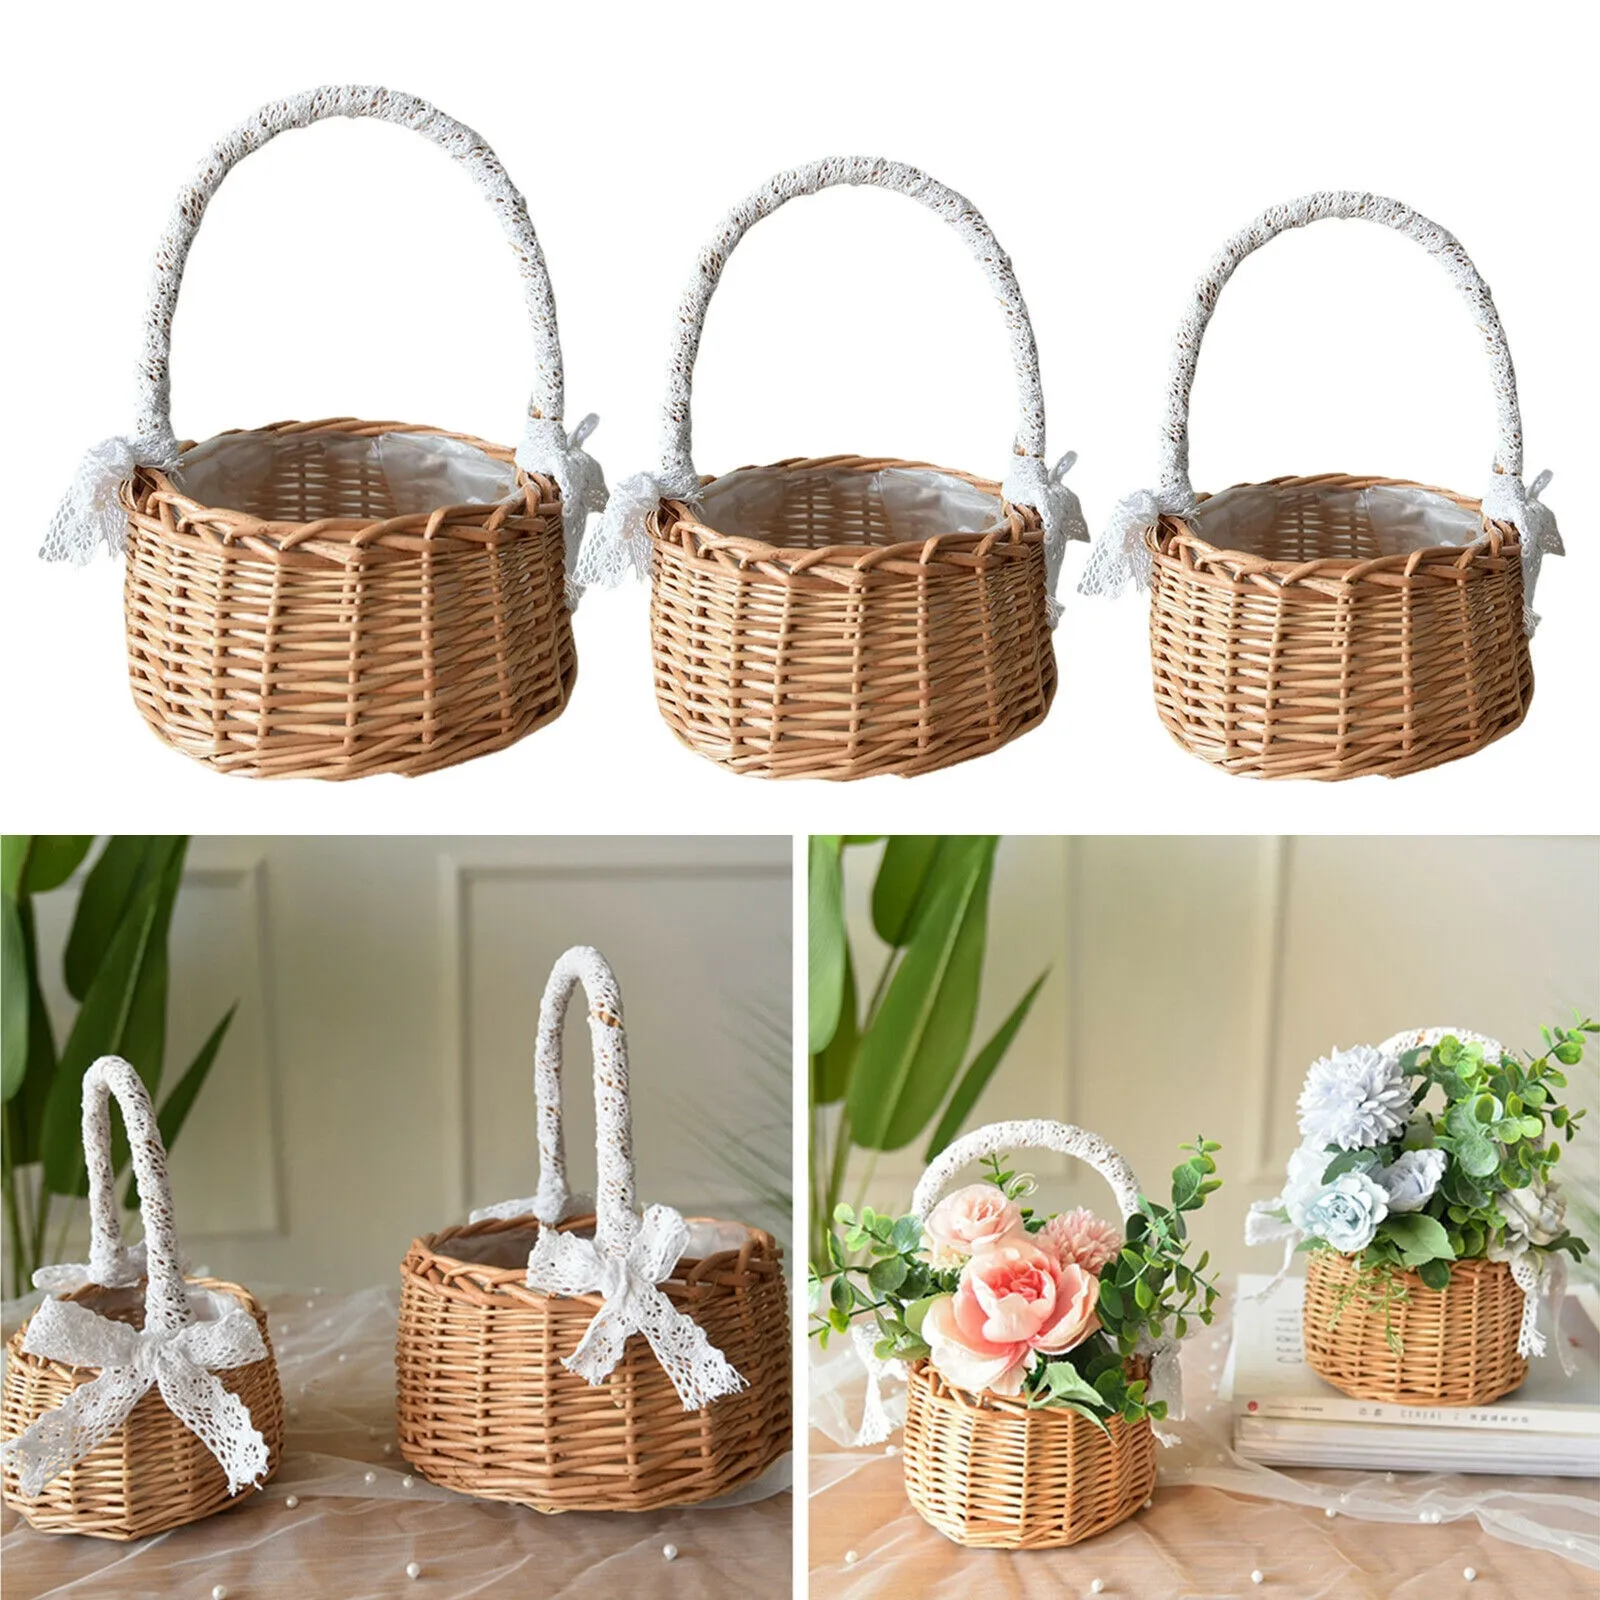 Storage Basket for Camping and Outdoor Dasing Wicker Rattan Flower Girl Baskets Wicker Picnic Basket Hand Woven Basket Fruit Basket Decorative with Handle and Lace Bow Prop Basket 